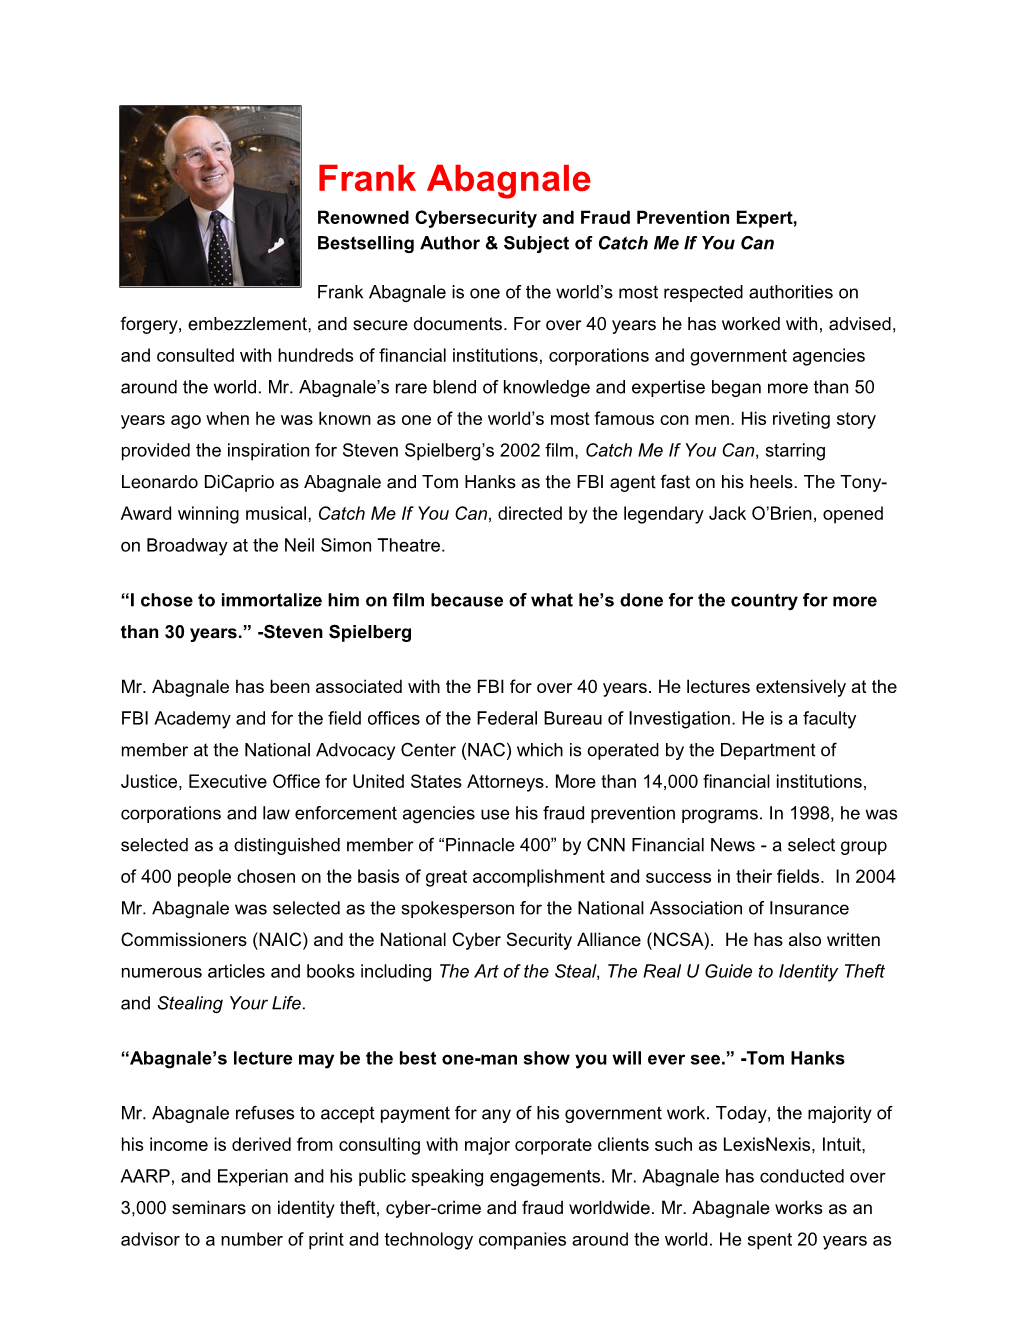 Frank Abagnale Renowned Cybersecurity and Fraud Prevention Expert, Bestselling Author & Subject of Catch Me If You Can